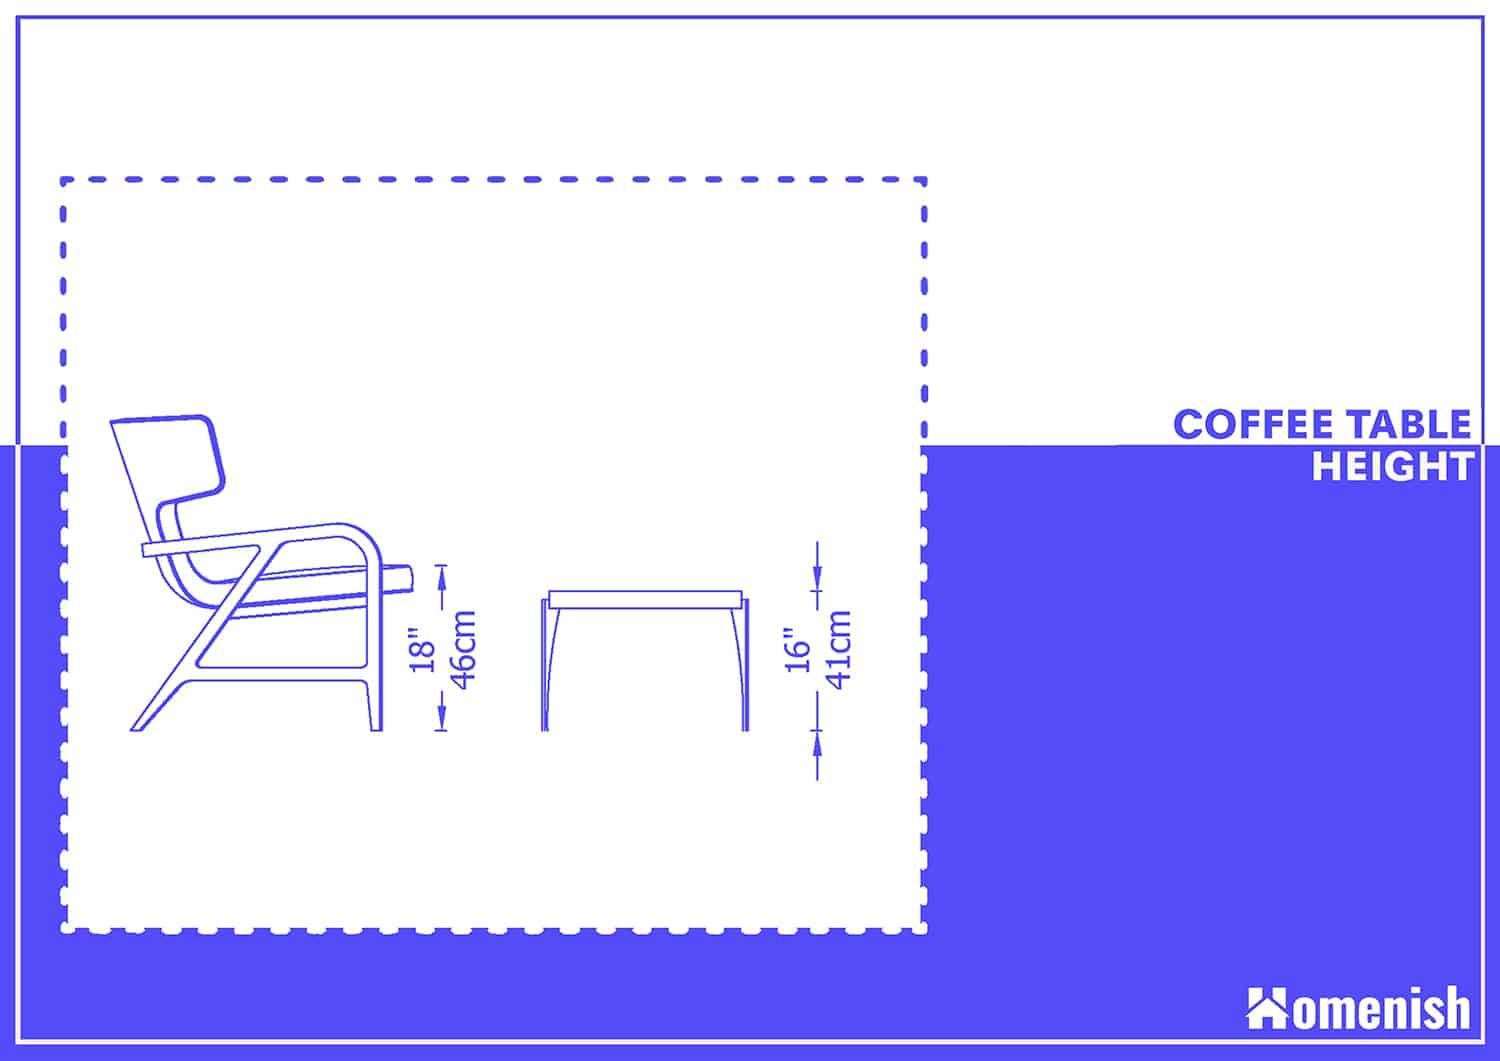 Standard Coffee Table Size For Your, What Is Standard Coffee Table Height